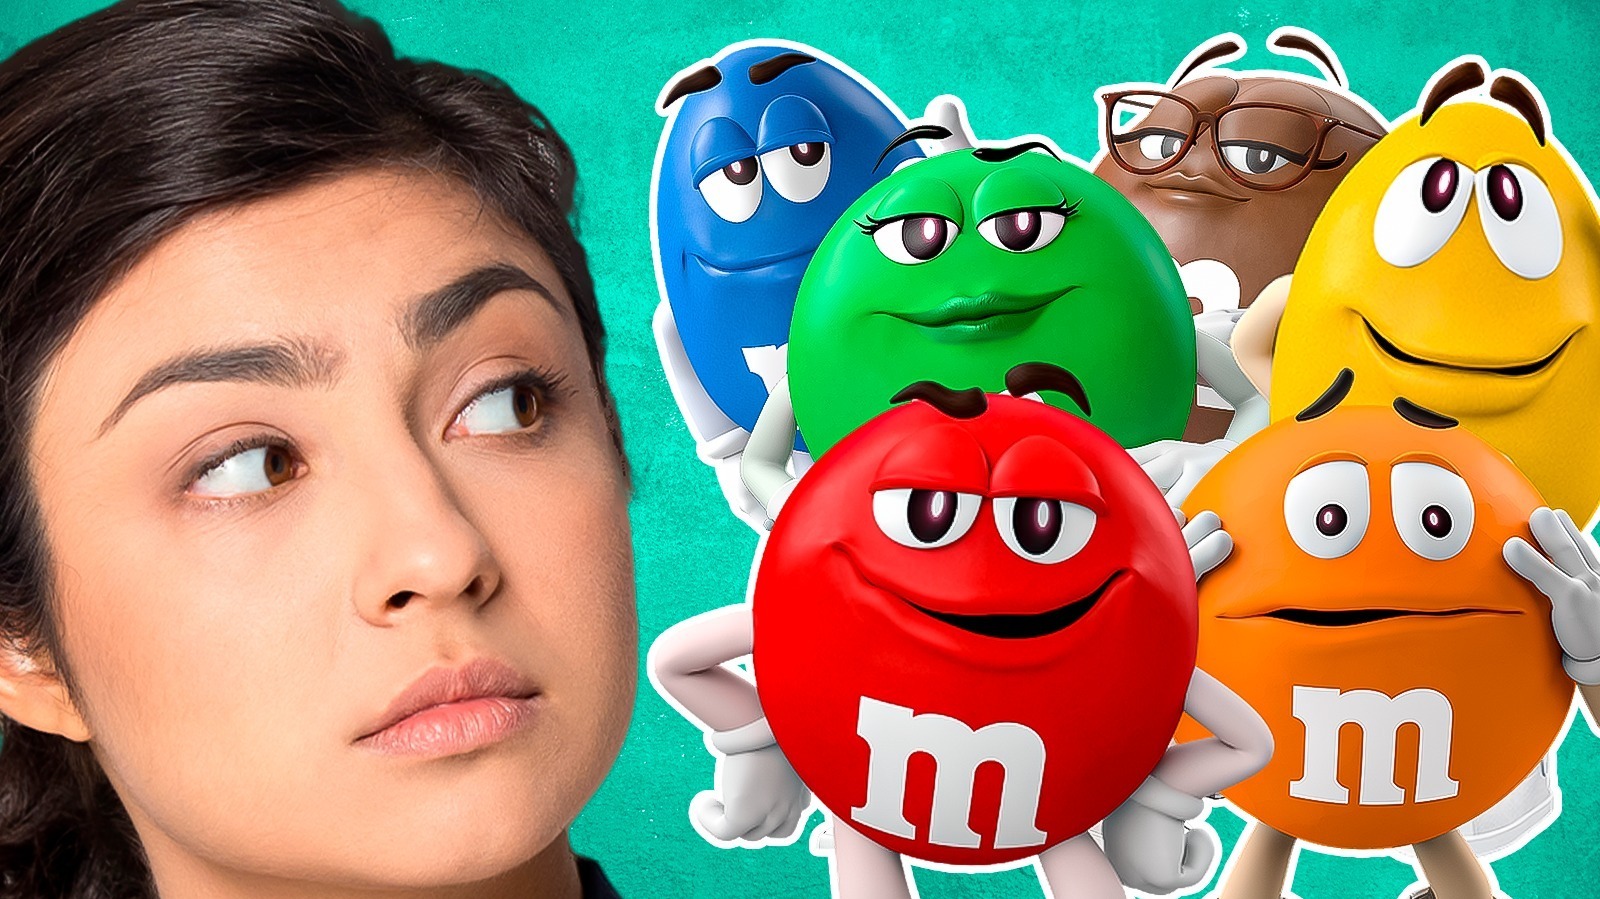 M&M's debuts purple candy character to celebrate inclusivity